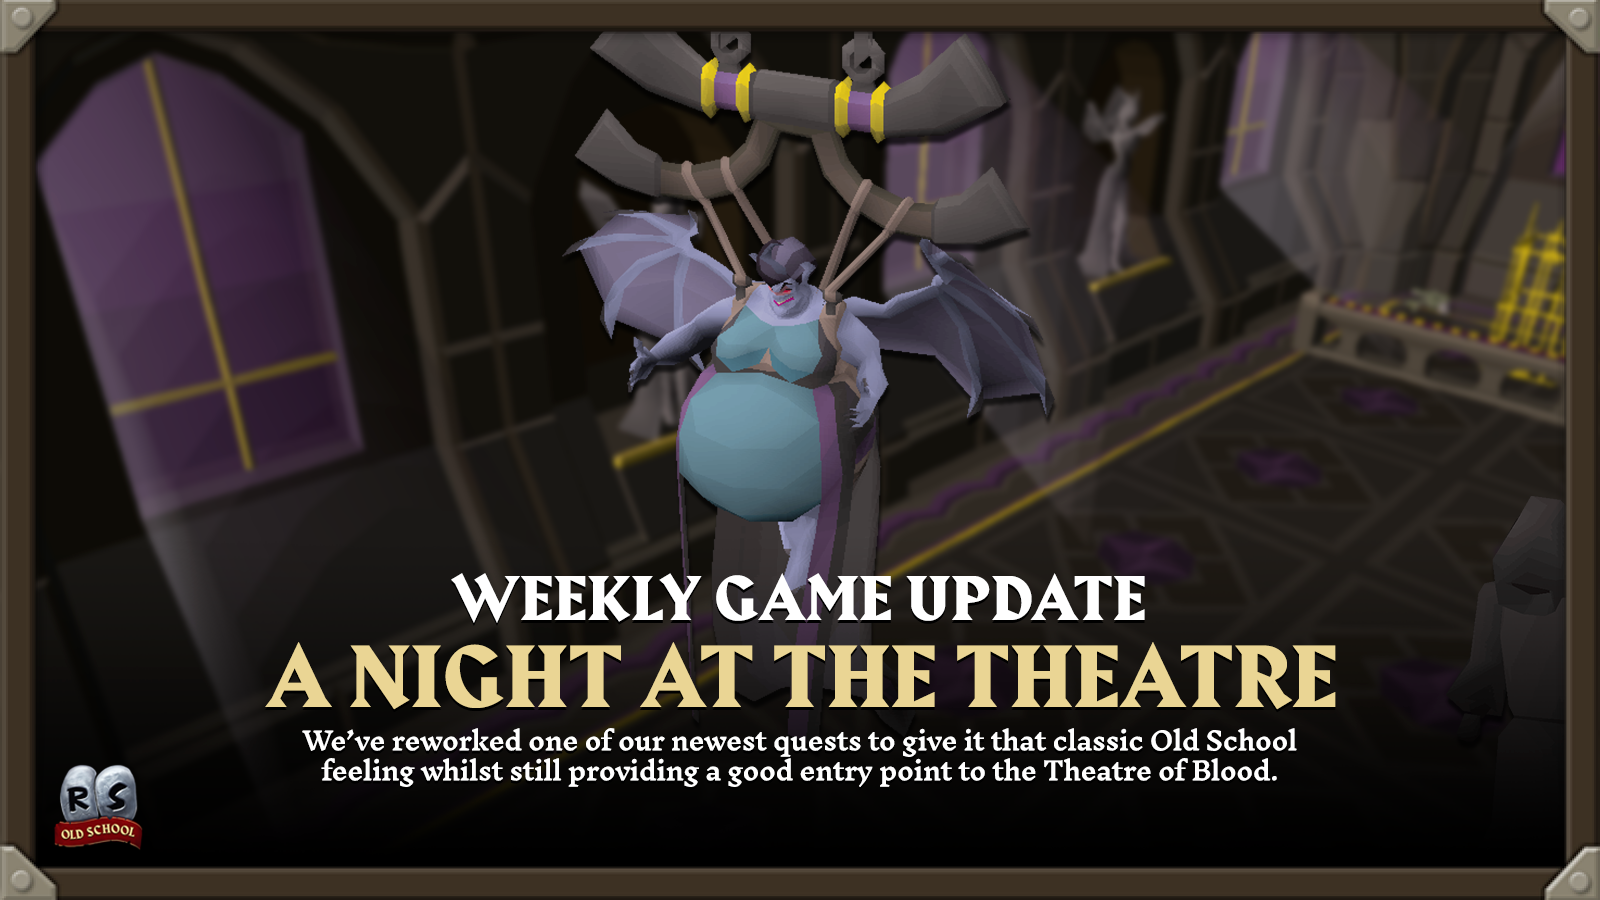 Old School RuneScape - A Night At The Theatre Rework (Weekly Game Update -  July 28th) - Steam News